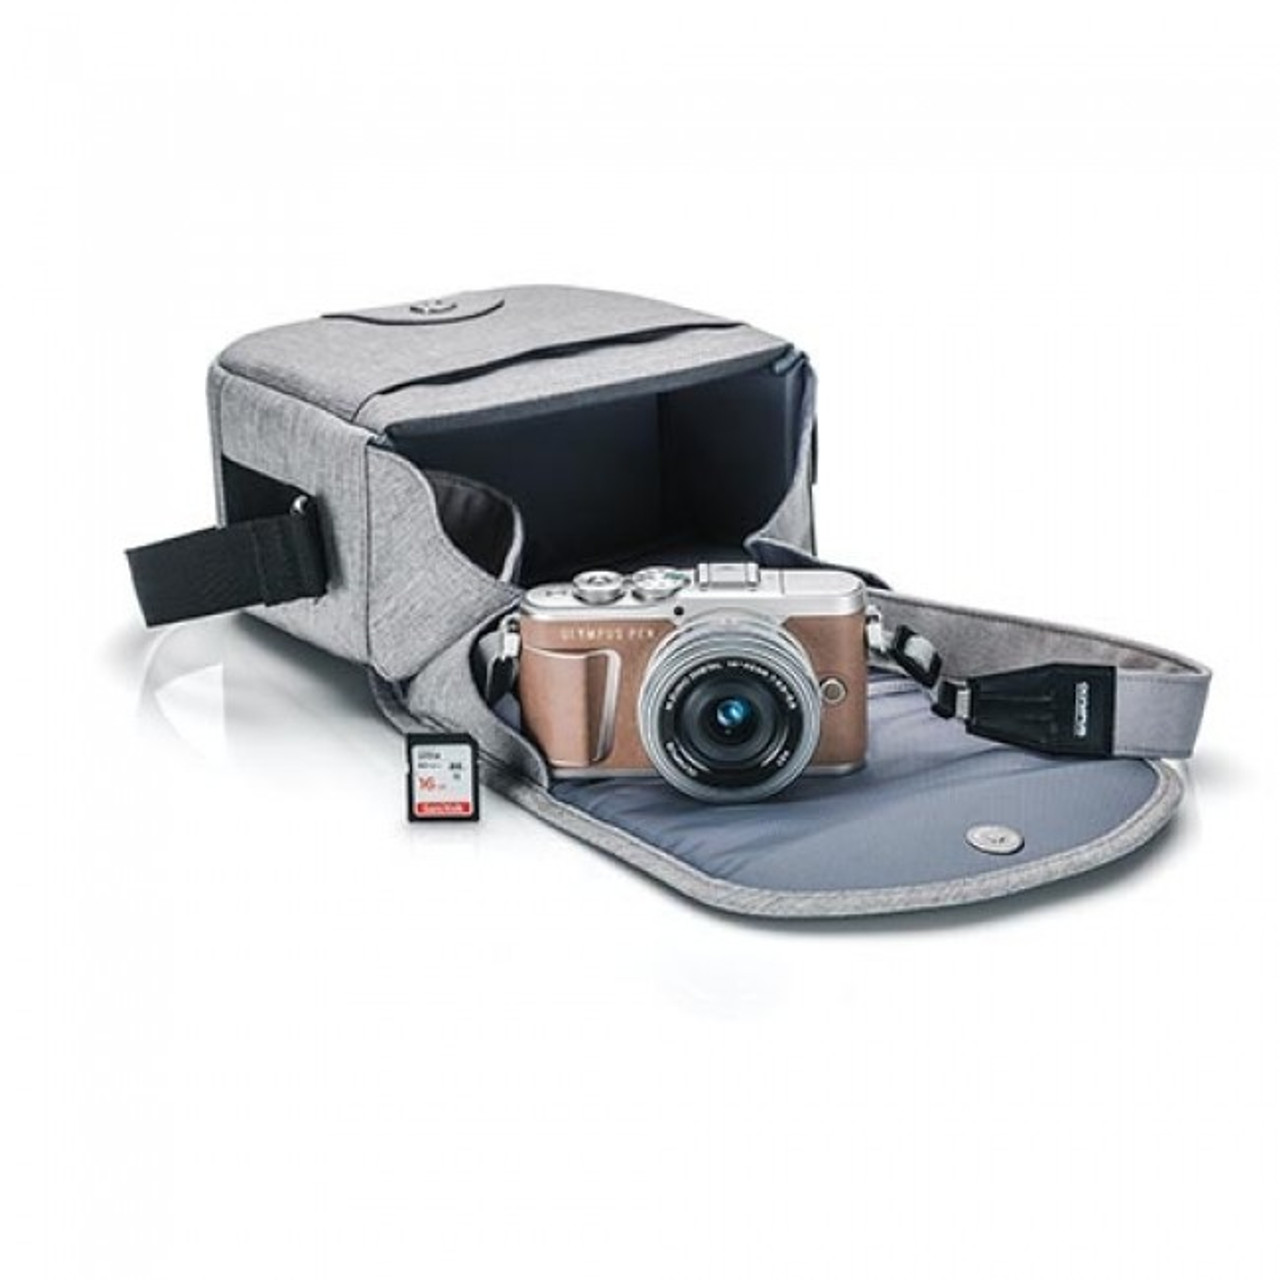 OLYMPUS E-PL9 BROWN BODY WITH 14-42 IIR LENS KIT (V205092NU010